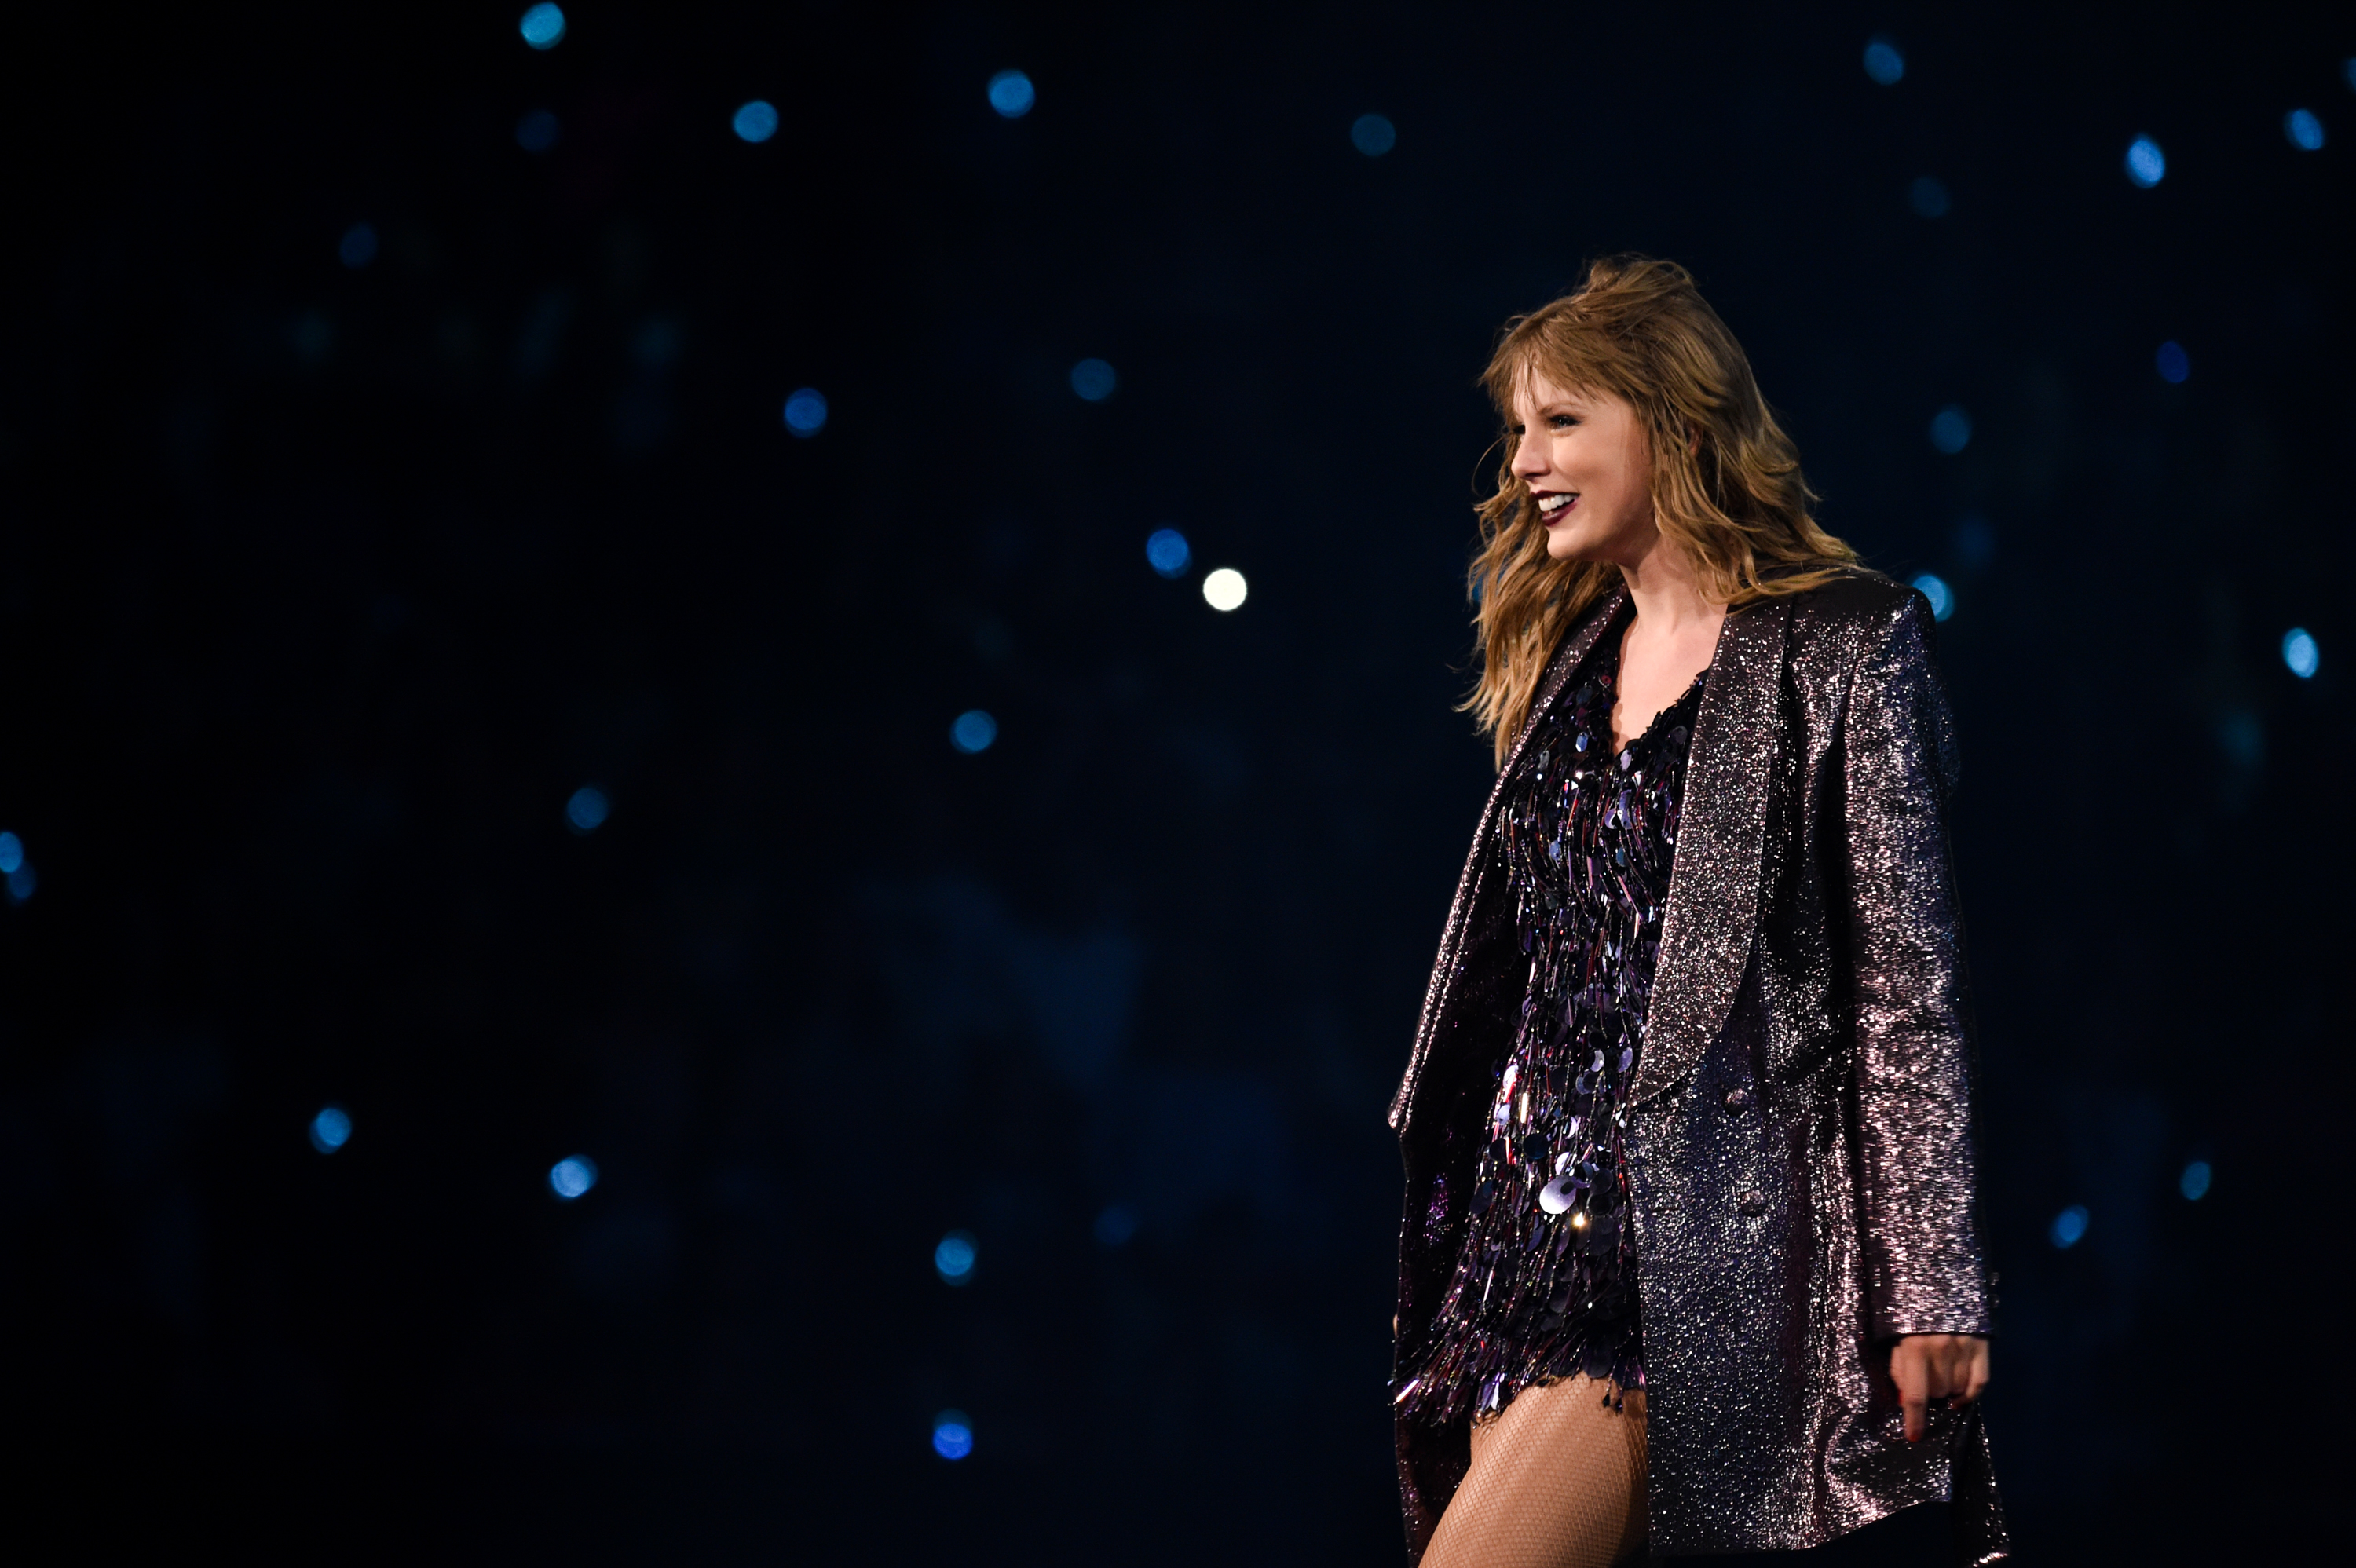 Taylor Swift performs onstage during the Taylor Swift reputation Stadium Tour at Mercedes-Benz Stadium on August 11, 2018 in Atlanta, Georgia.  (Photo by John Shearer/TAS18/Getty Images for TAS) (John Shearer/TAS18&mdash;Getty Images for TAS)